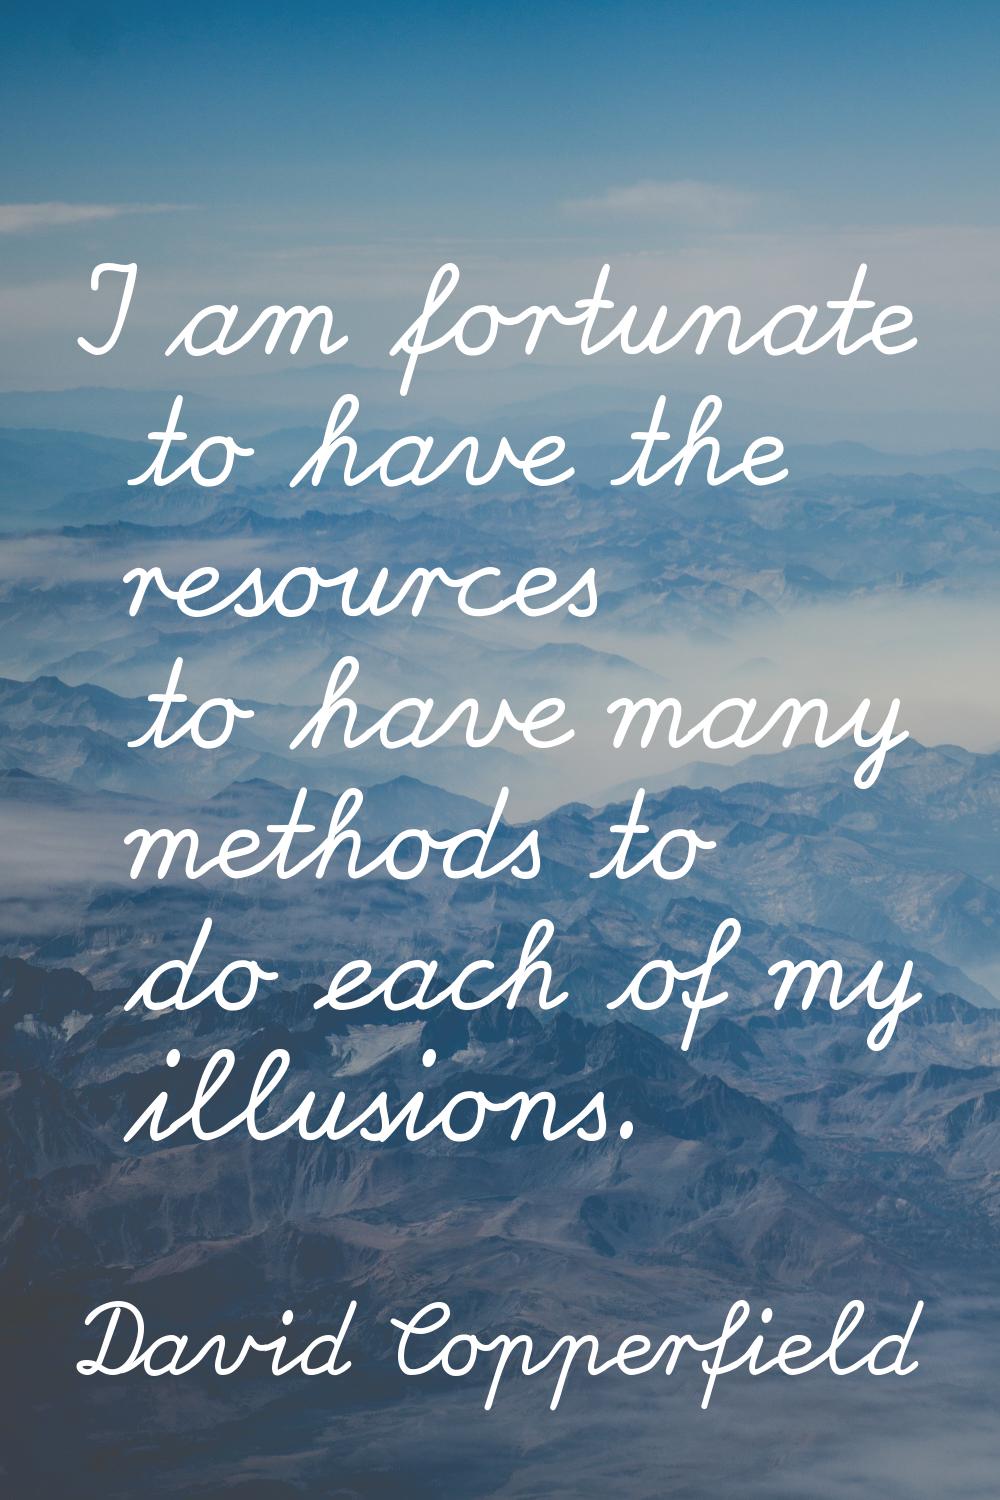 I am fortunate to have the resources to have many methods to do each of my illusions.